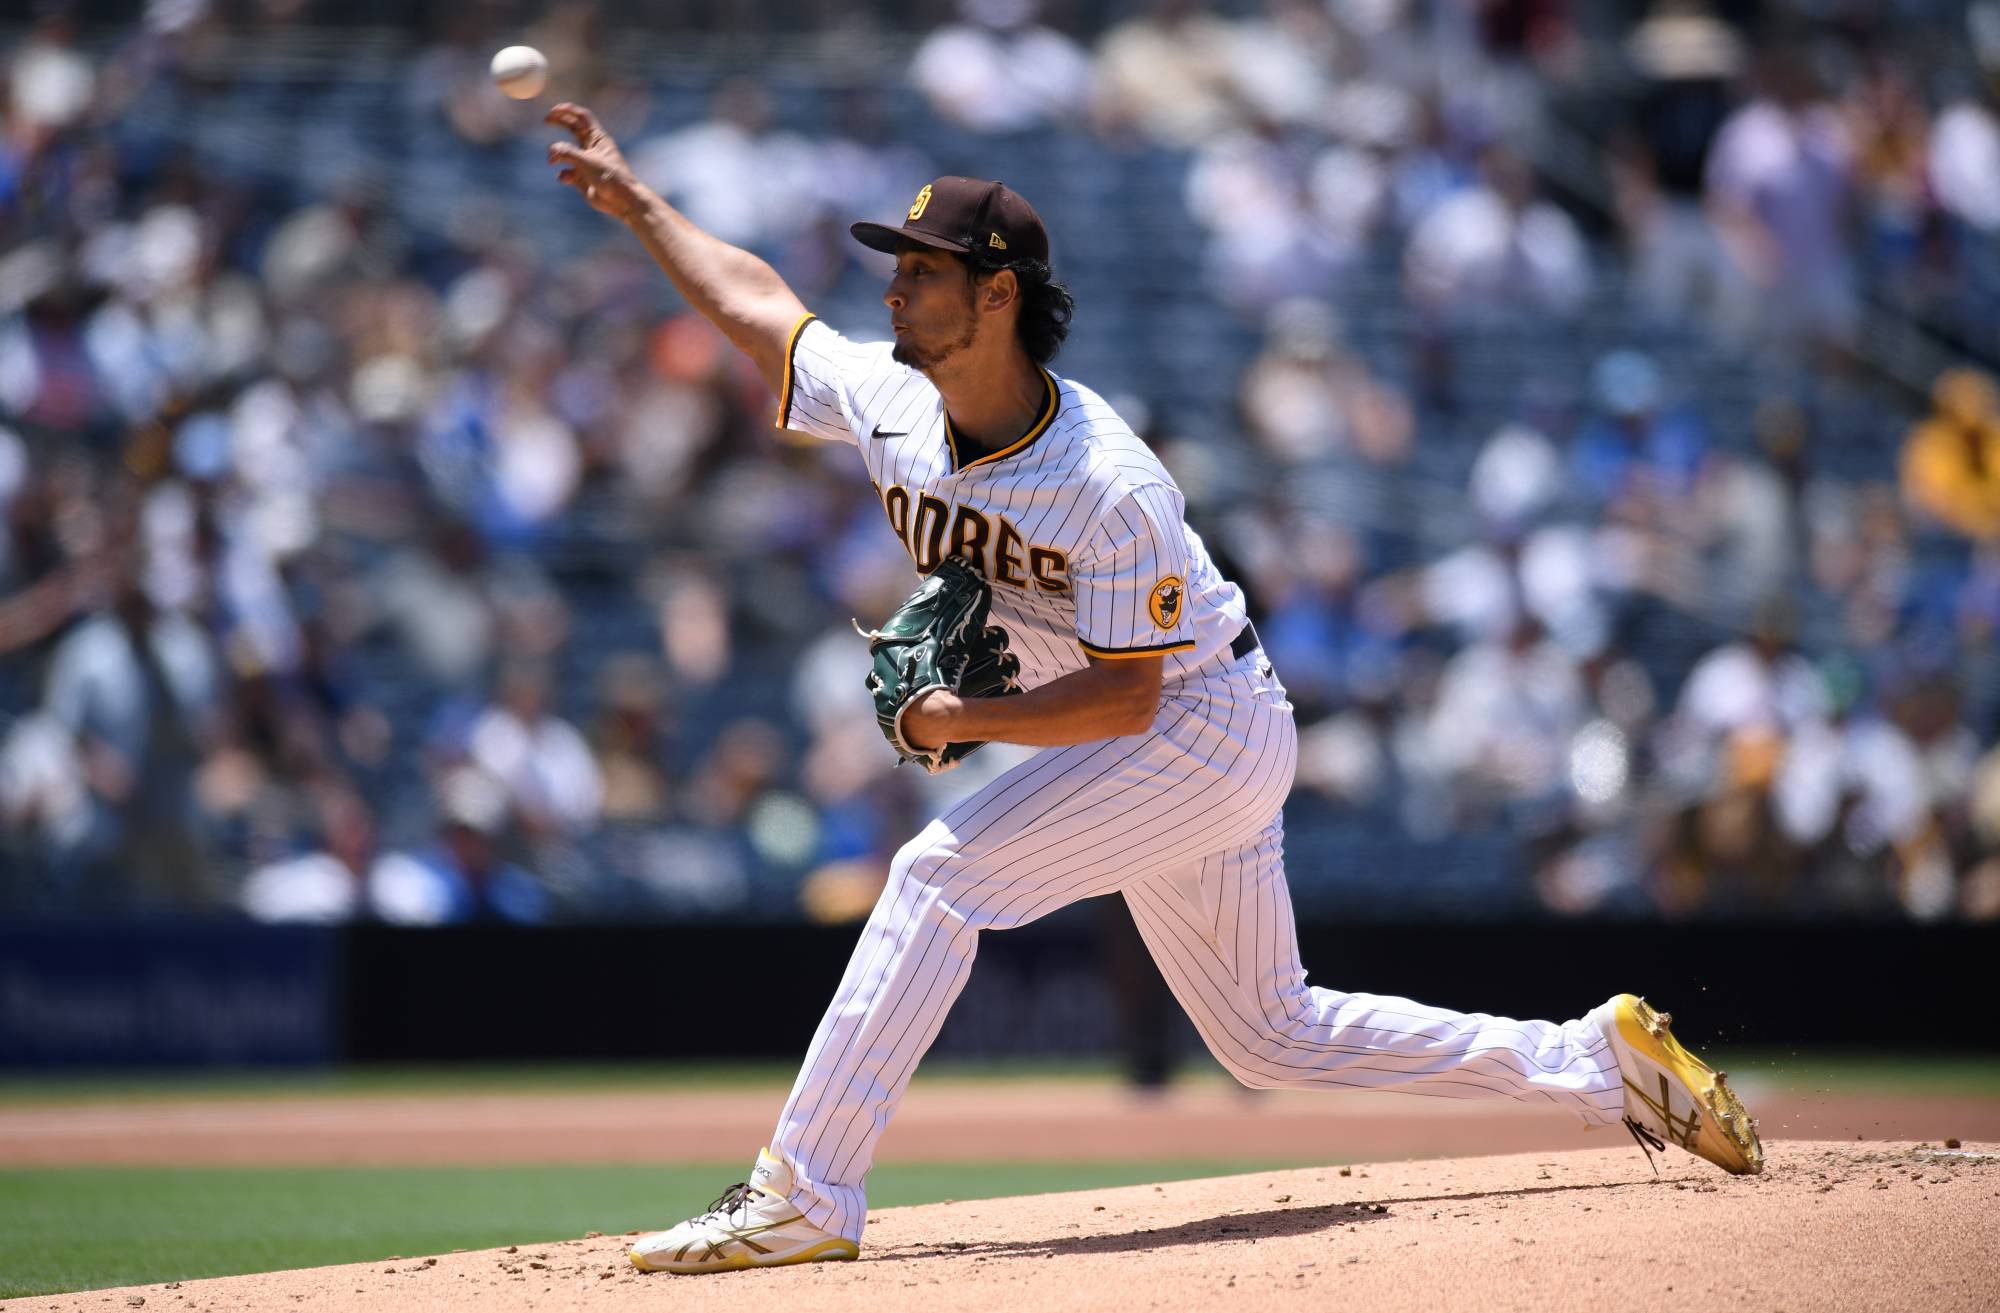 Padres Acquire Pitcher Yu Darvish In blockbuster Trade With Cubs